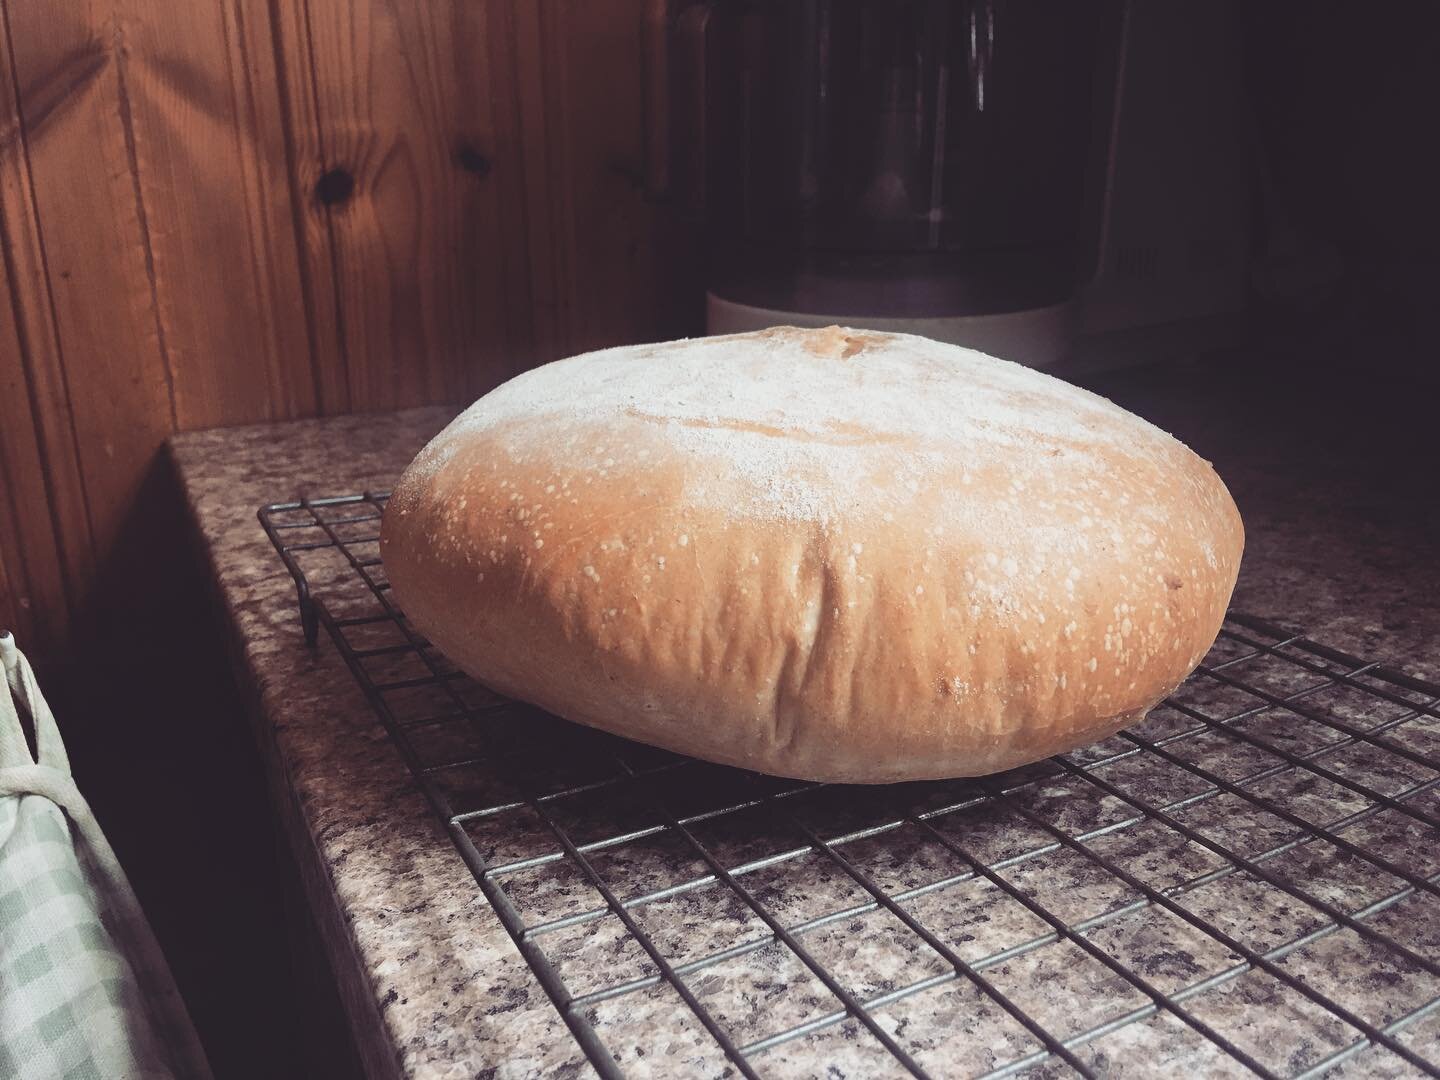 Tried to make bread but end product looks like yeasty whoopee cushion. Also managed to burn hand and entirely cover self with flour. Clearly am natural domestic goddess type. #whoopie